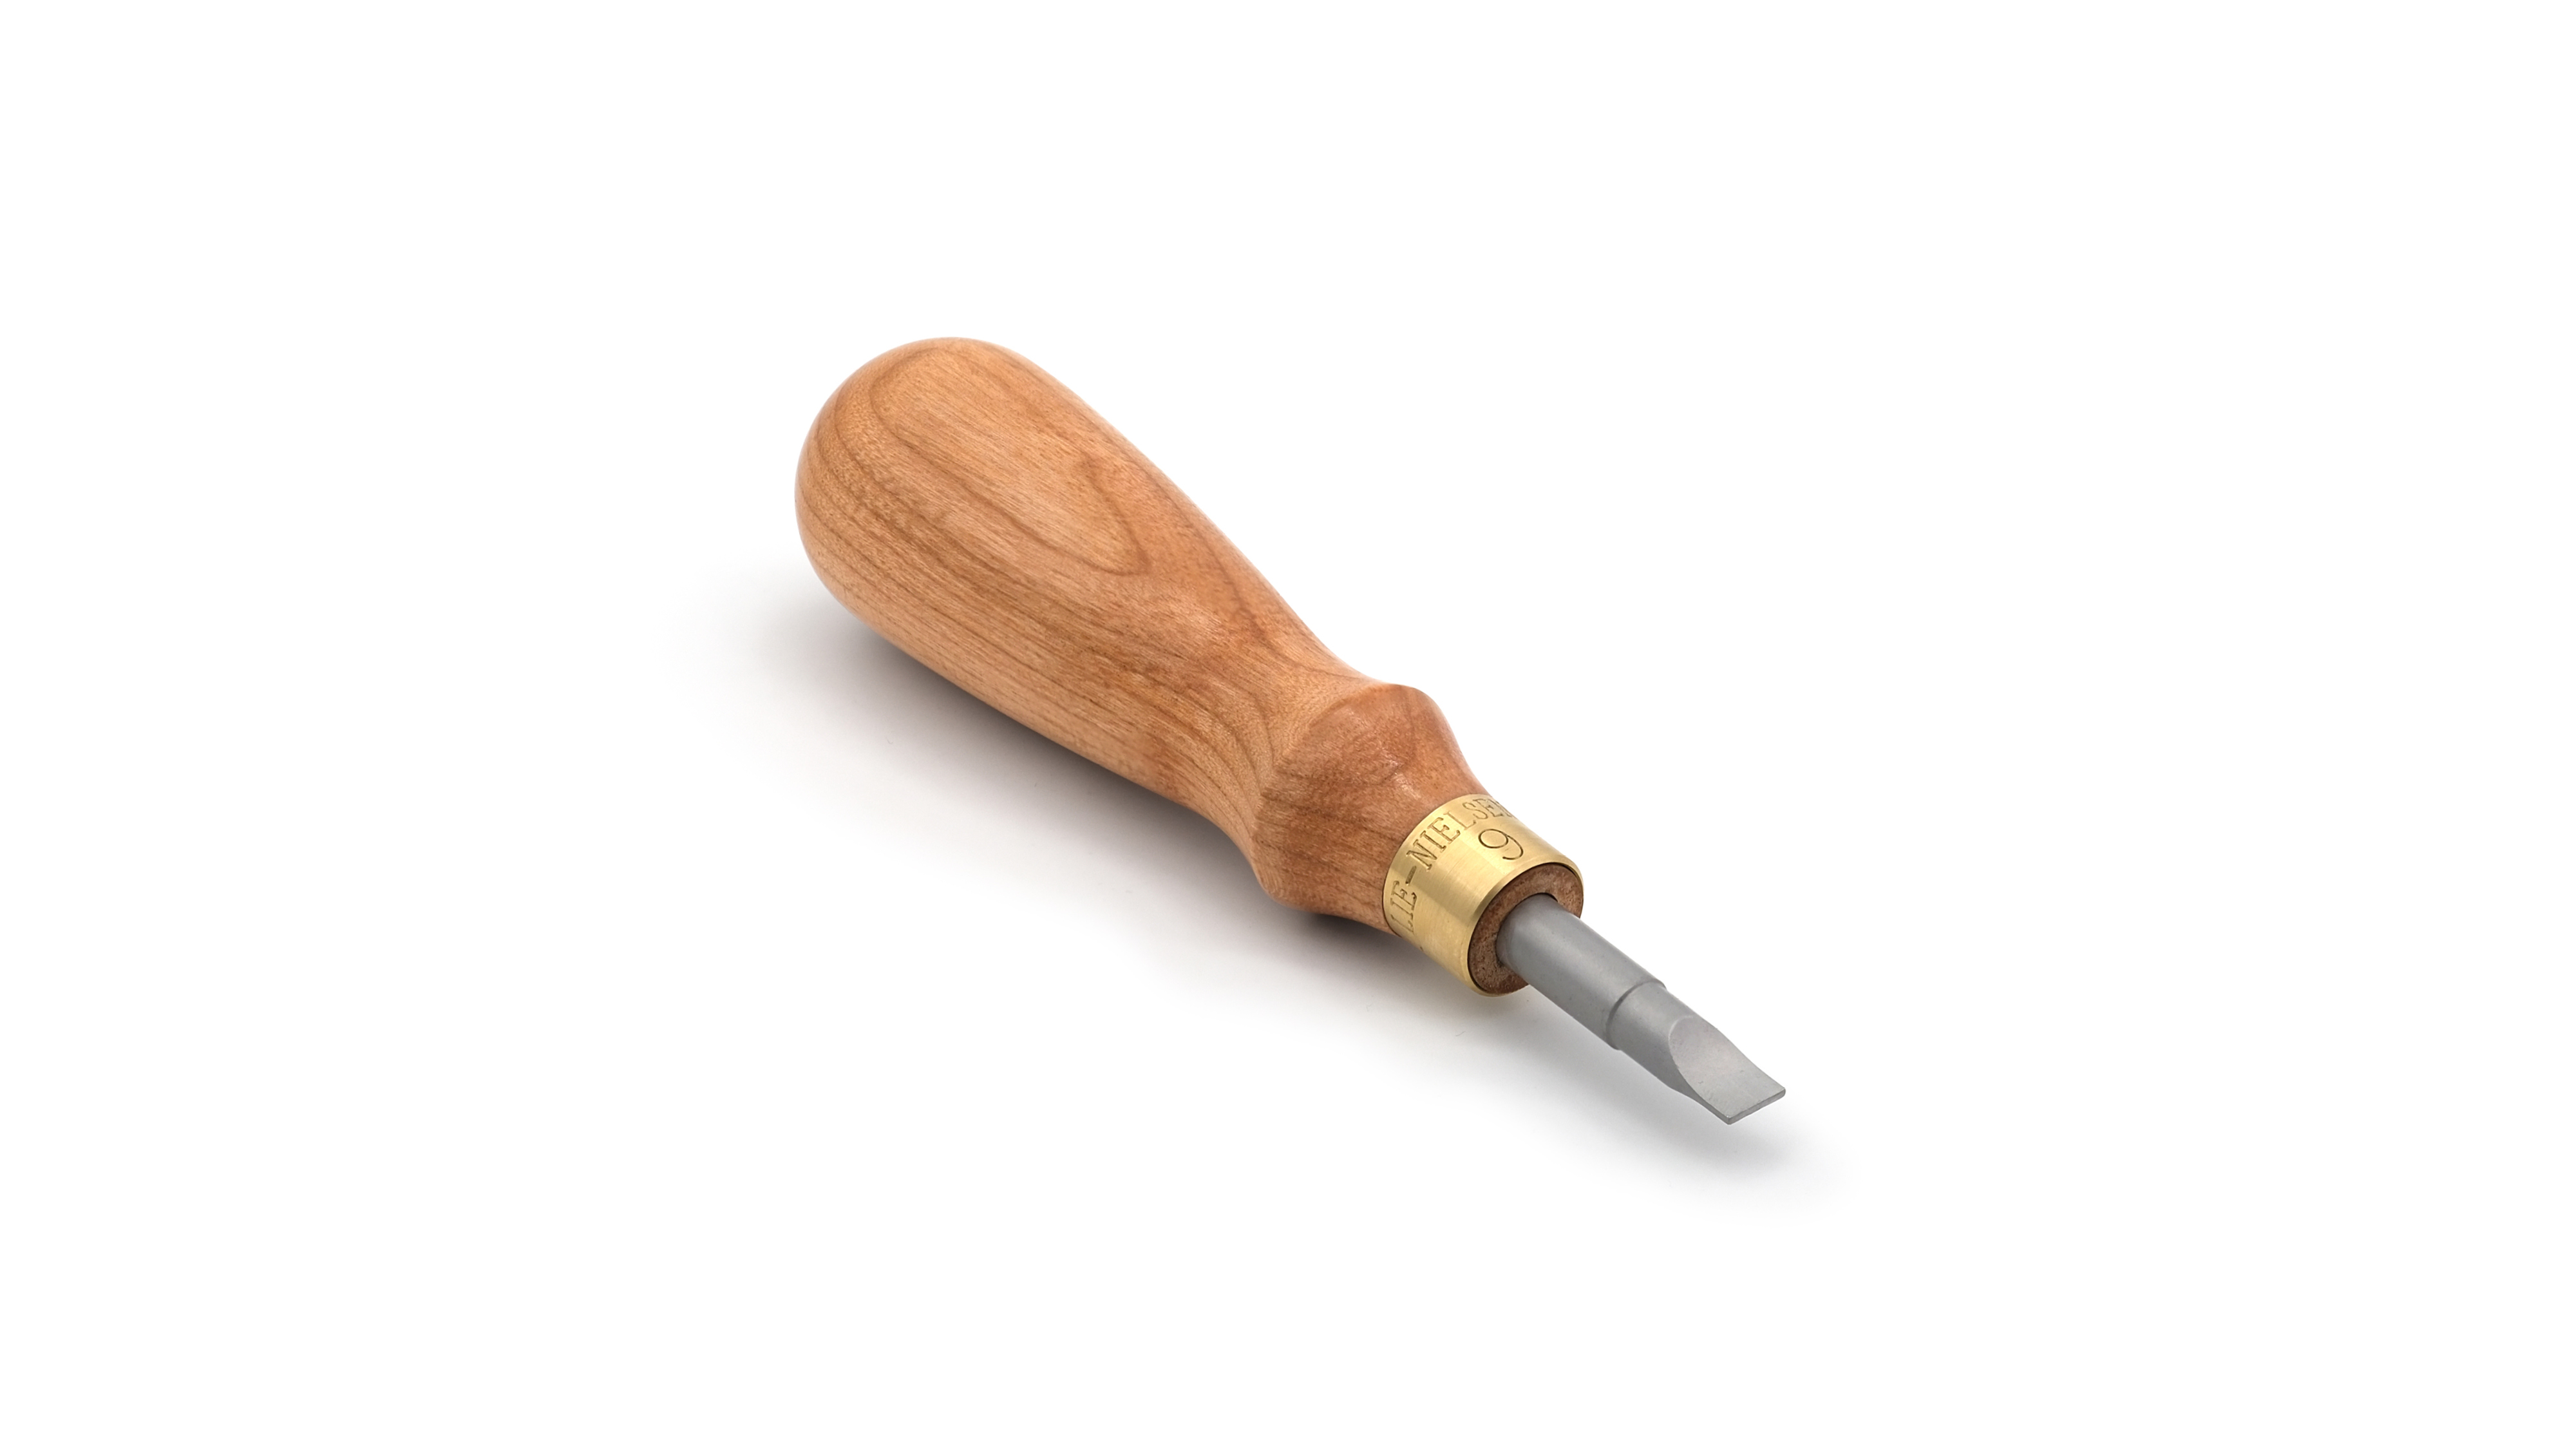 Honing Guide Screwdriver with Cherry Handle